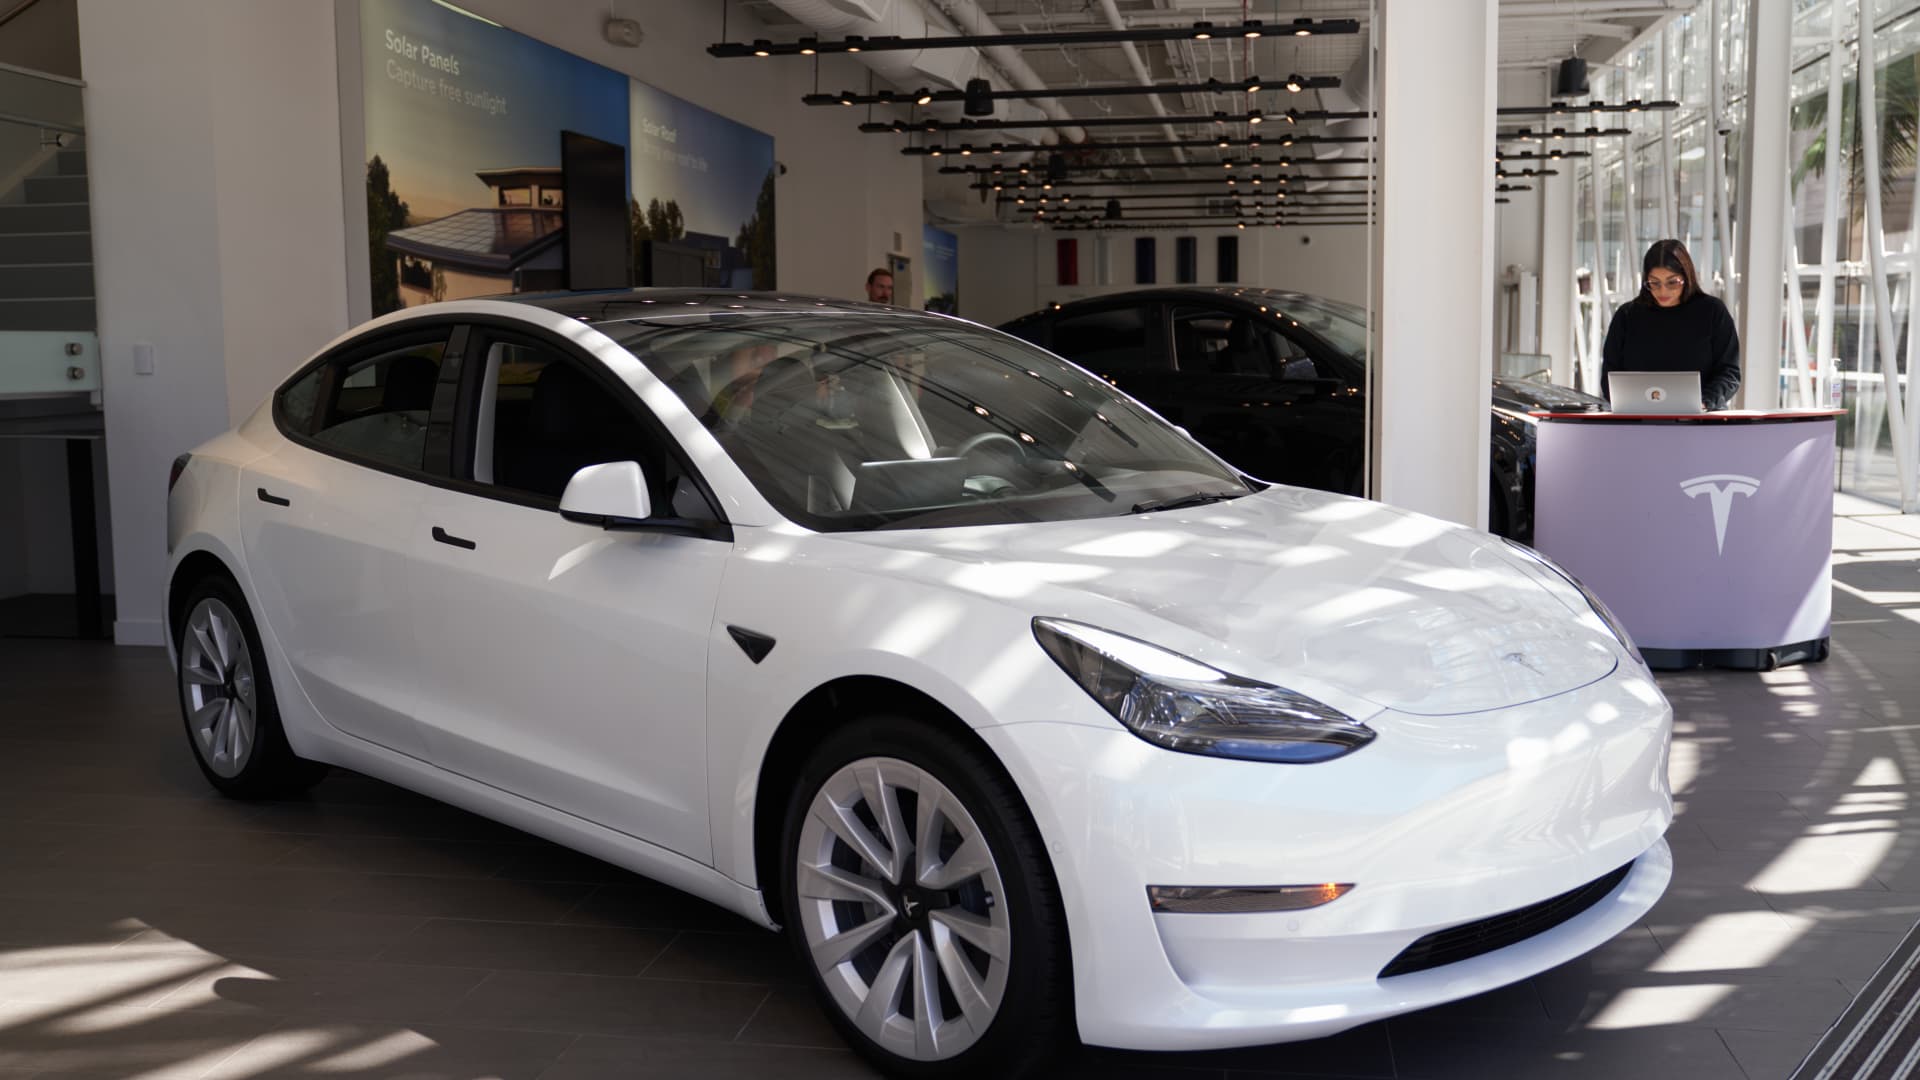 A Tesla Model 3 vehicle is on display at the Tesla auto store on September 22, 2022 in Santa Monica, California. Tesla is recalling over 1 million vehicles in the U.S. because the windows can pinch a person's fingers while being rolled up.